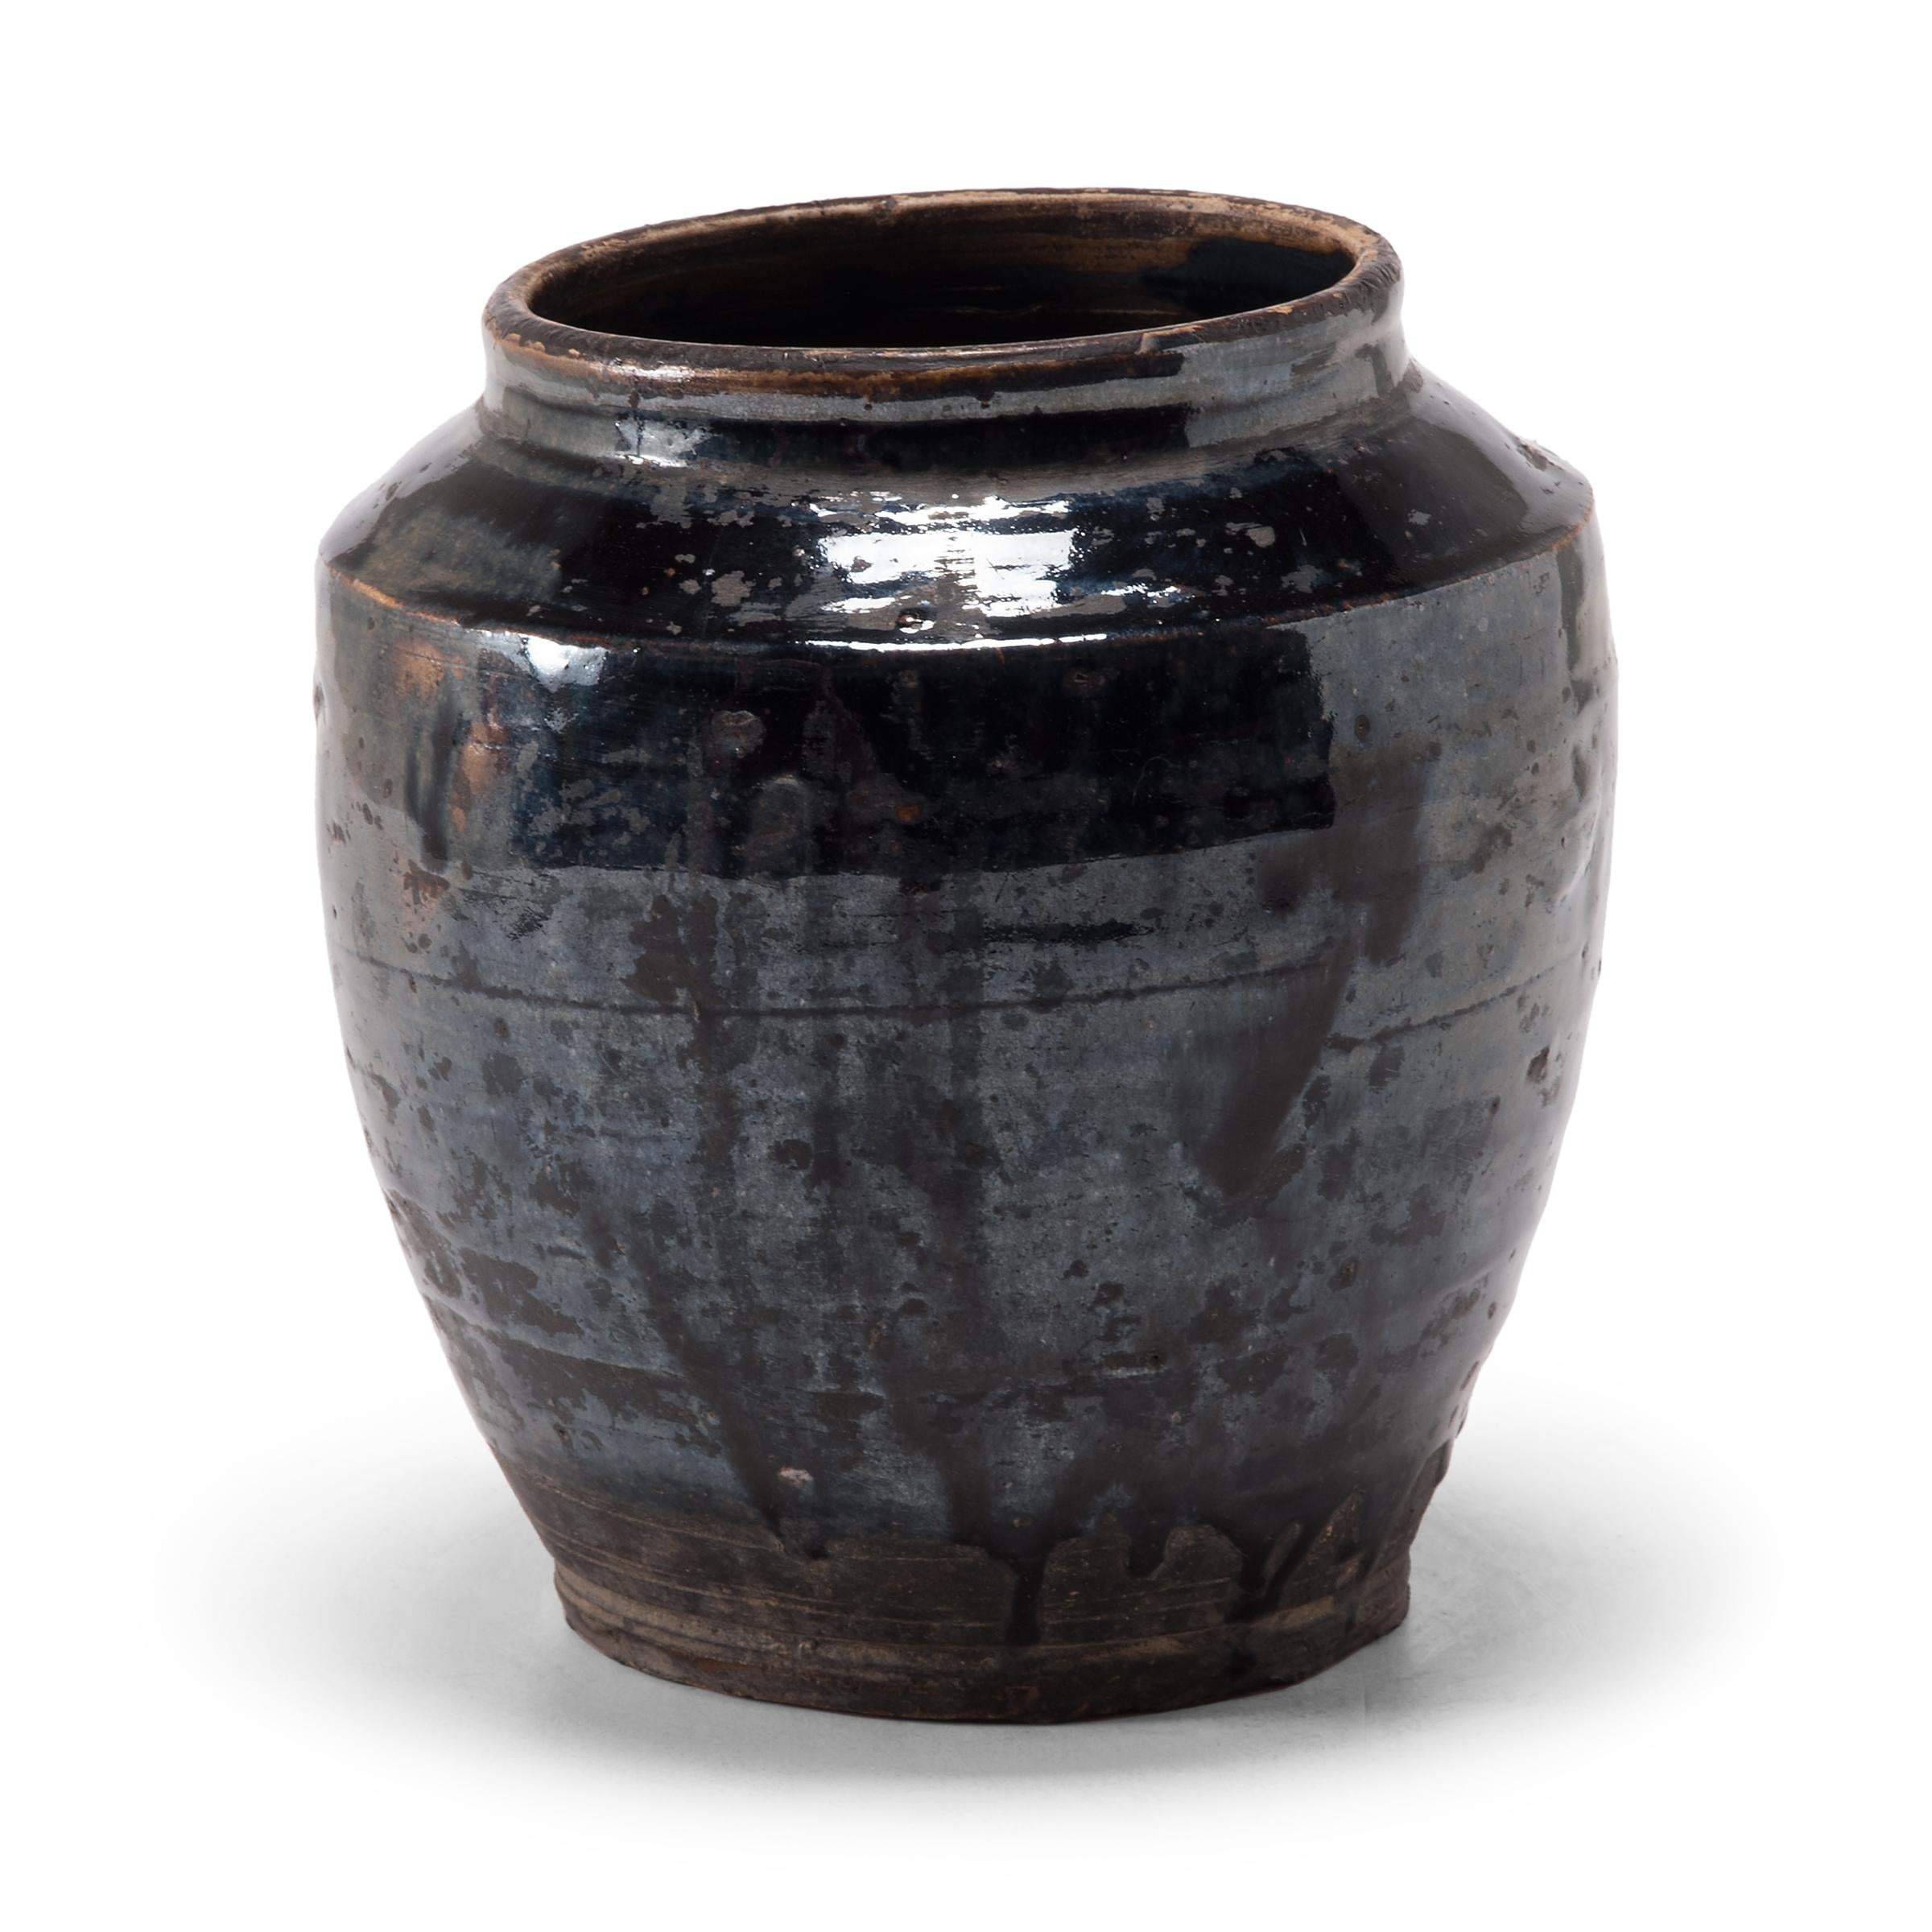 A dark glaze coats the angular body of this squat kitchen vessel, pooling in the shallow ridges along its sides with subtle iridescence. The petite early 20th century dish was once used for storing food in a Qing-dynasty kitchen, as evidenced by its